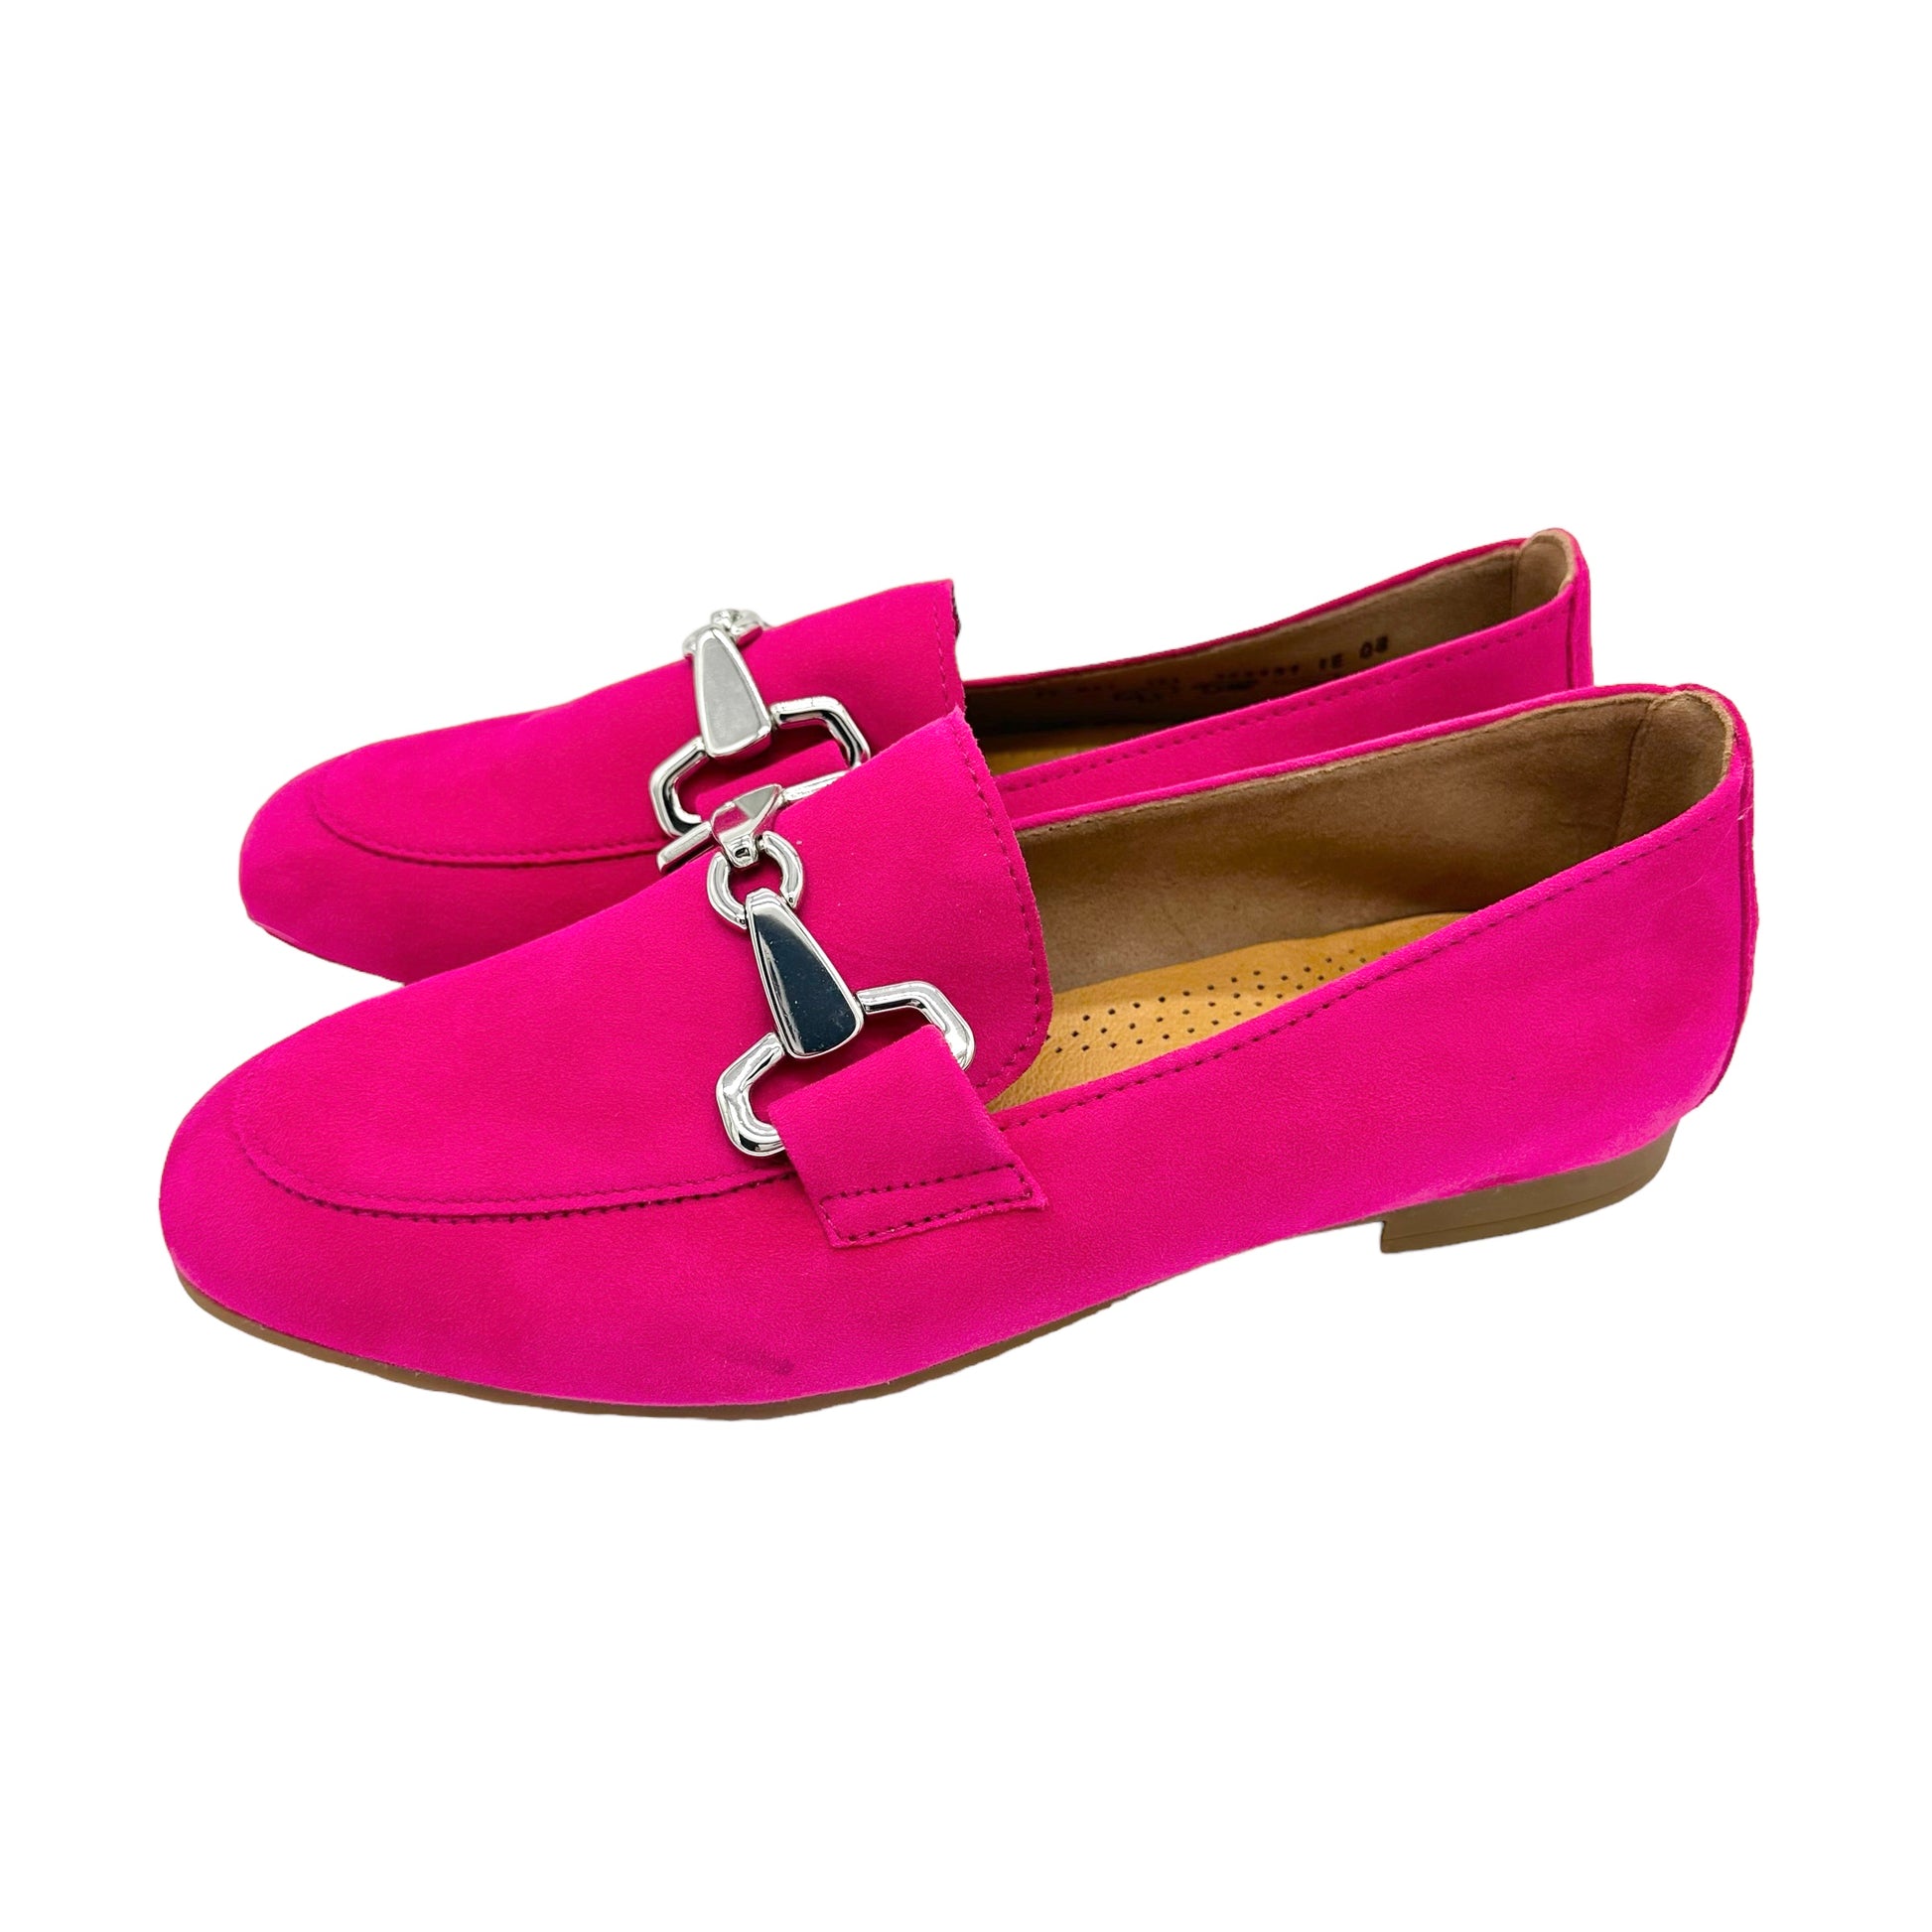 slids anden pels Gabor Jangle 25.211 soft summer suede loafers in fuchsia pink suede –  Arnouts Shoes